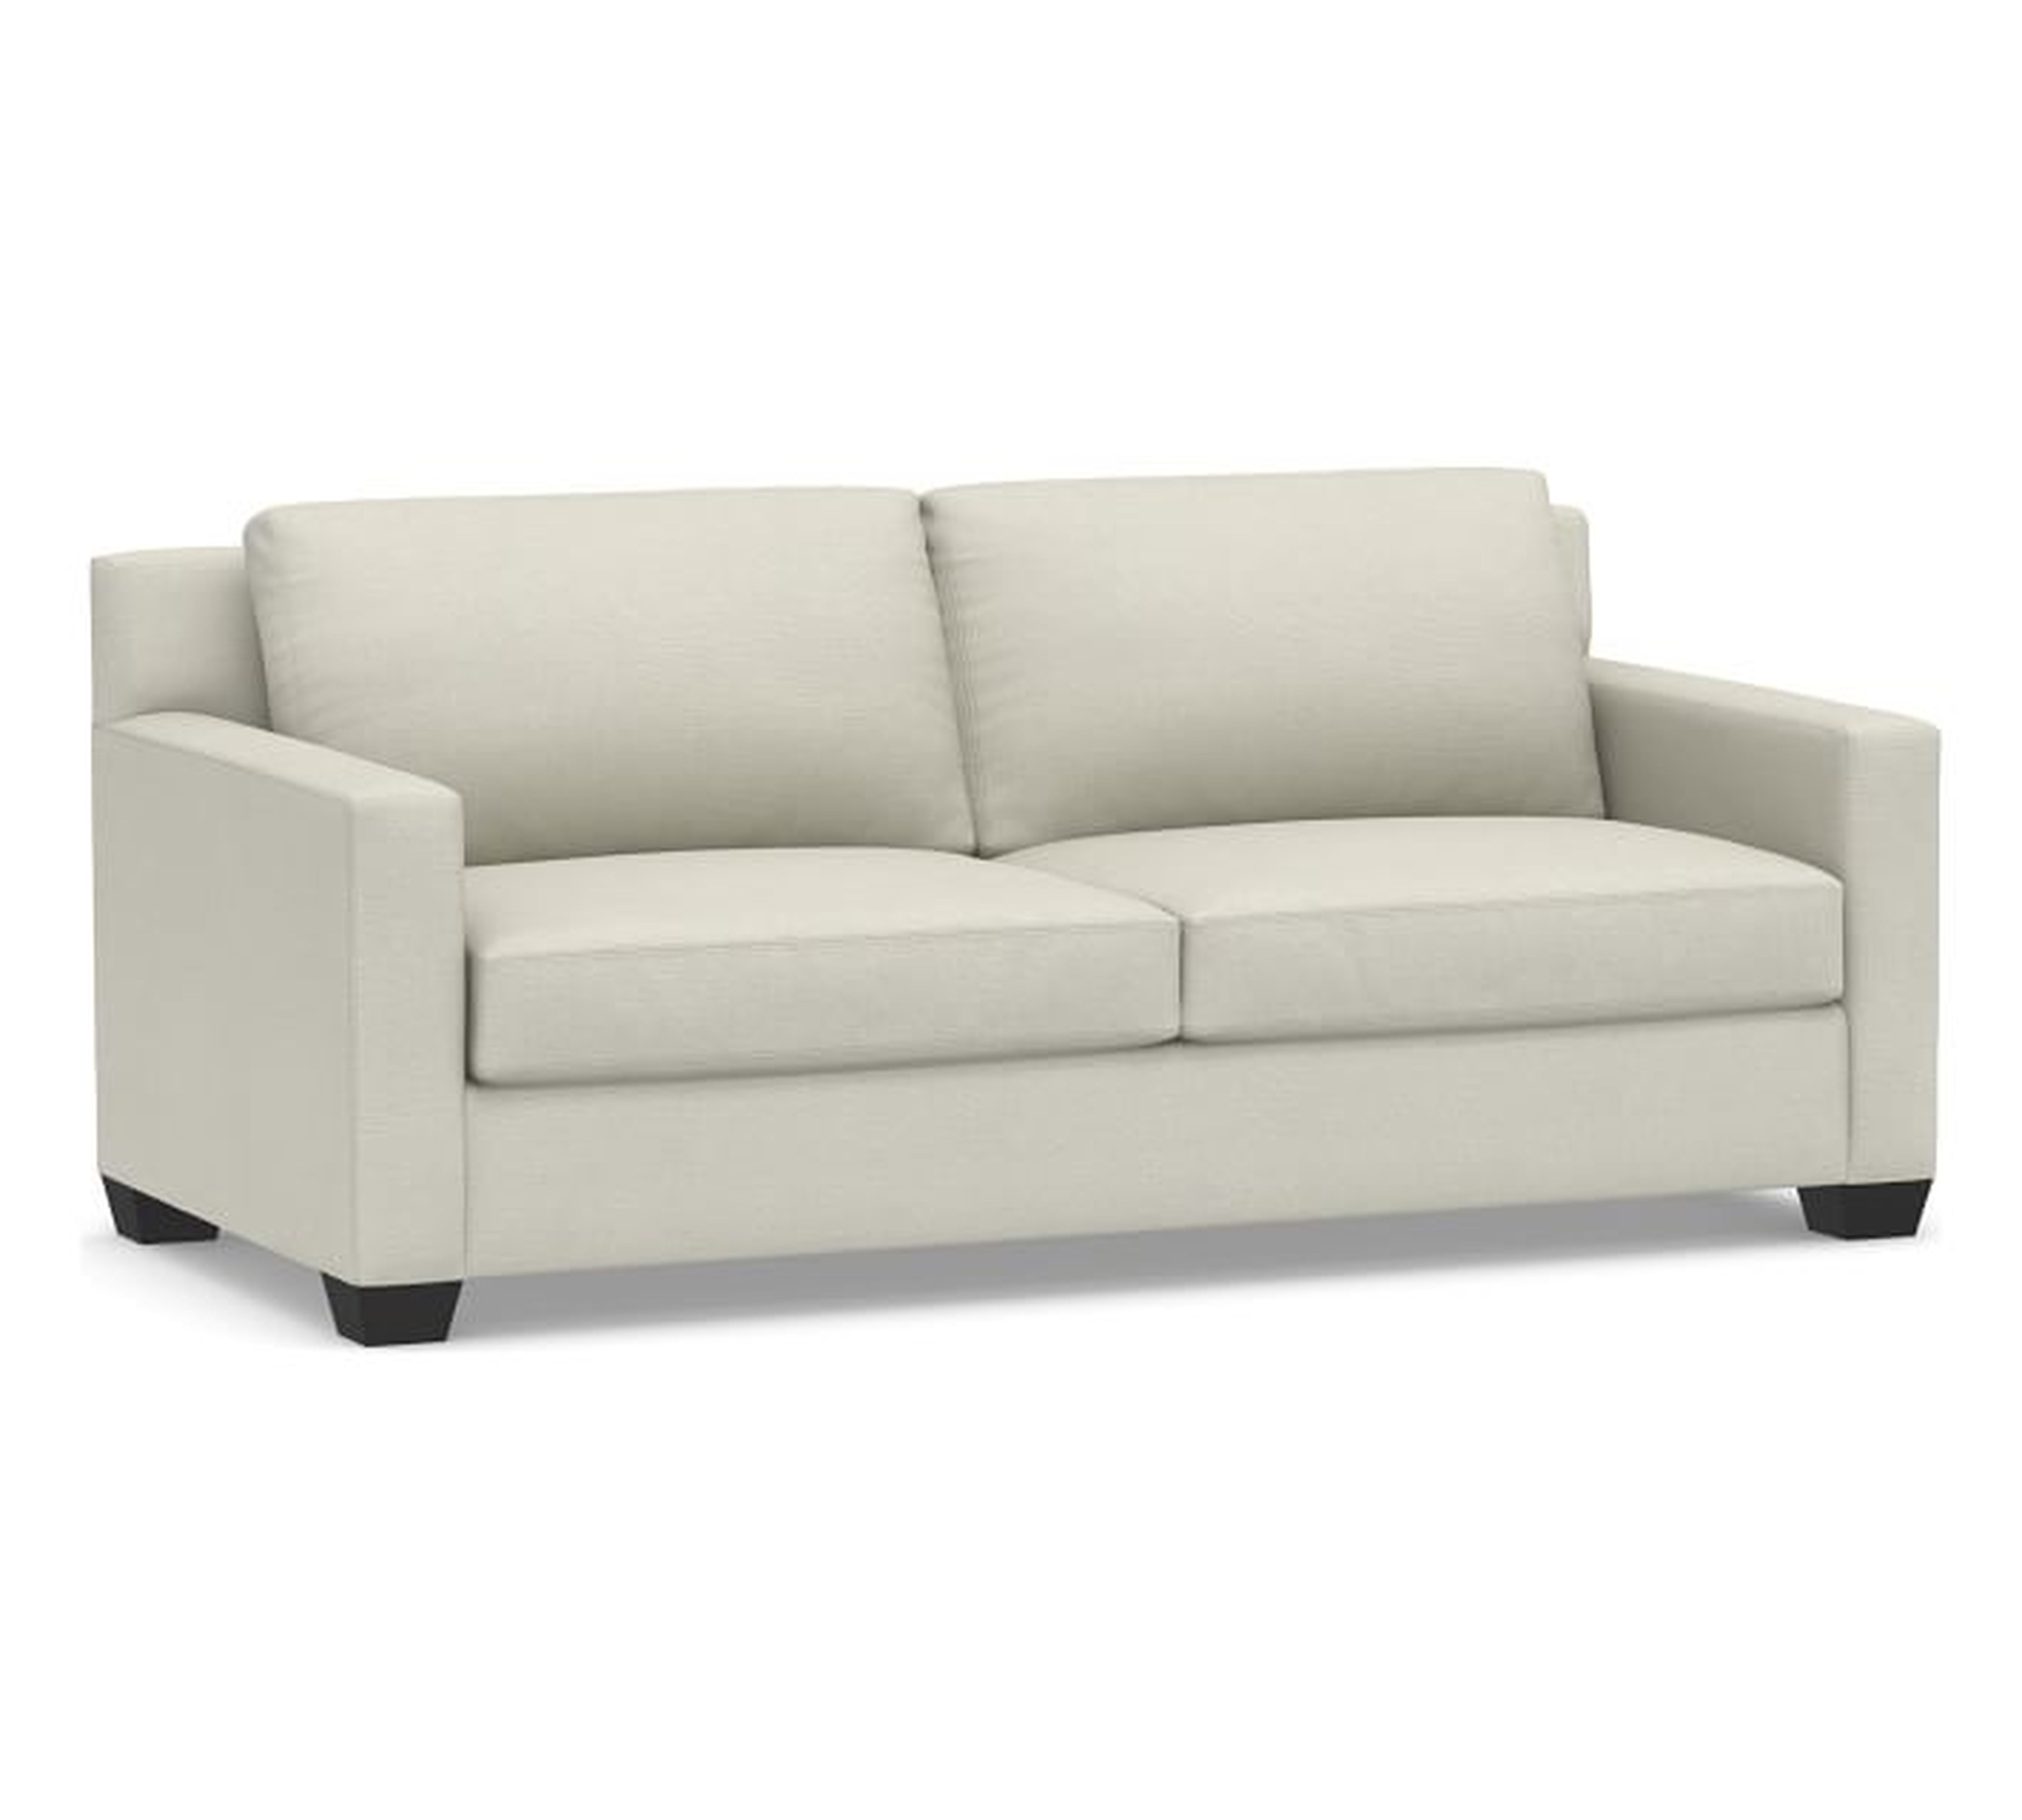 York Square Arm Upholstered Sofa 80.5" 2X2, Down Blend Wrapped Cushions, Premium Performance Basketweave Pebble - Pottery Barn